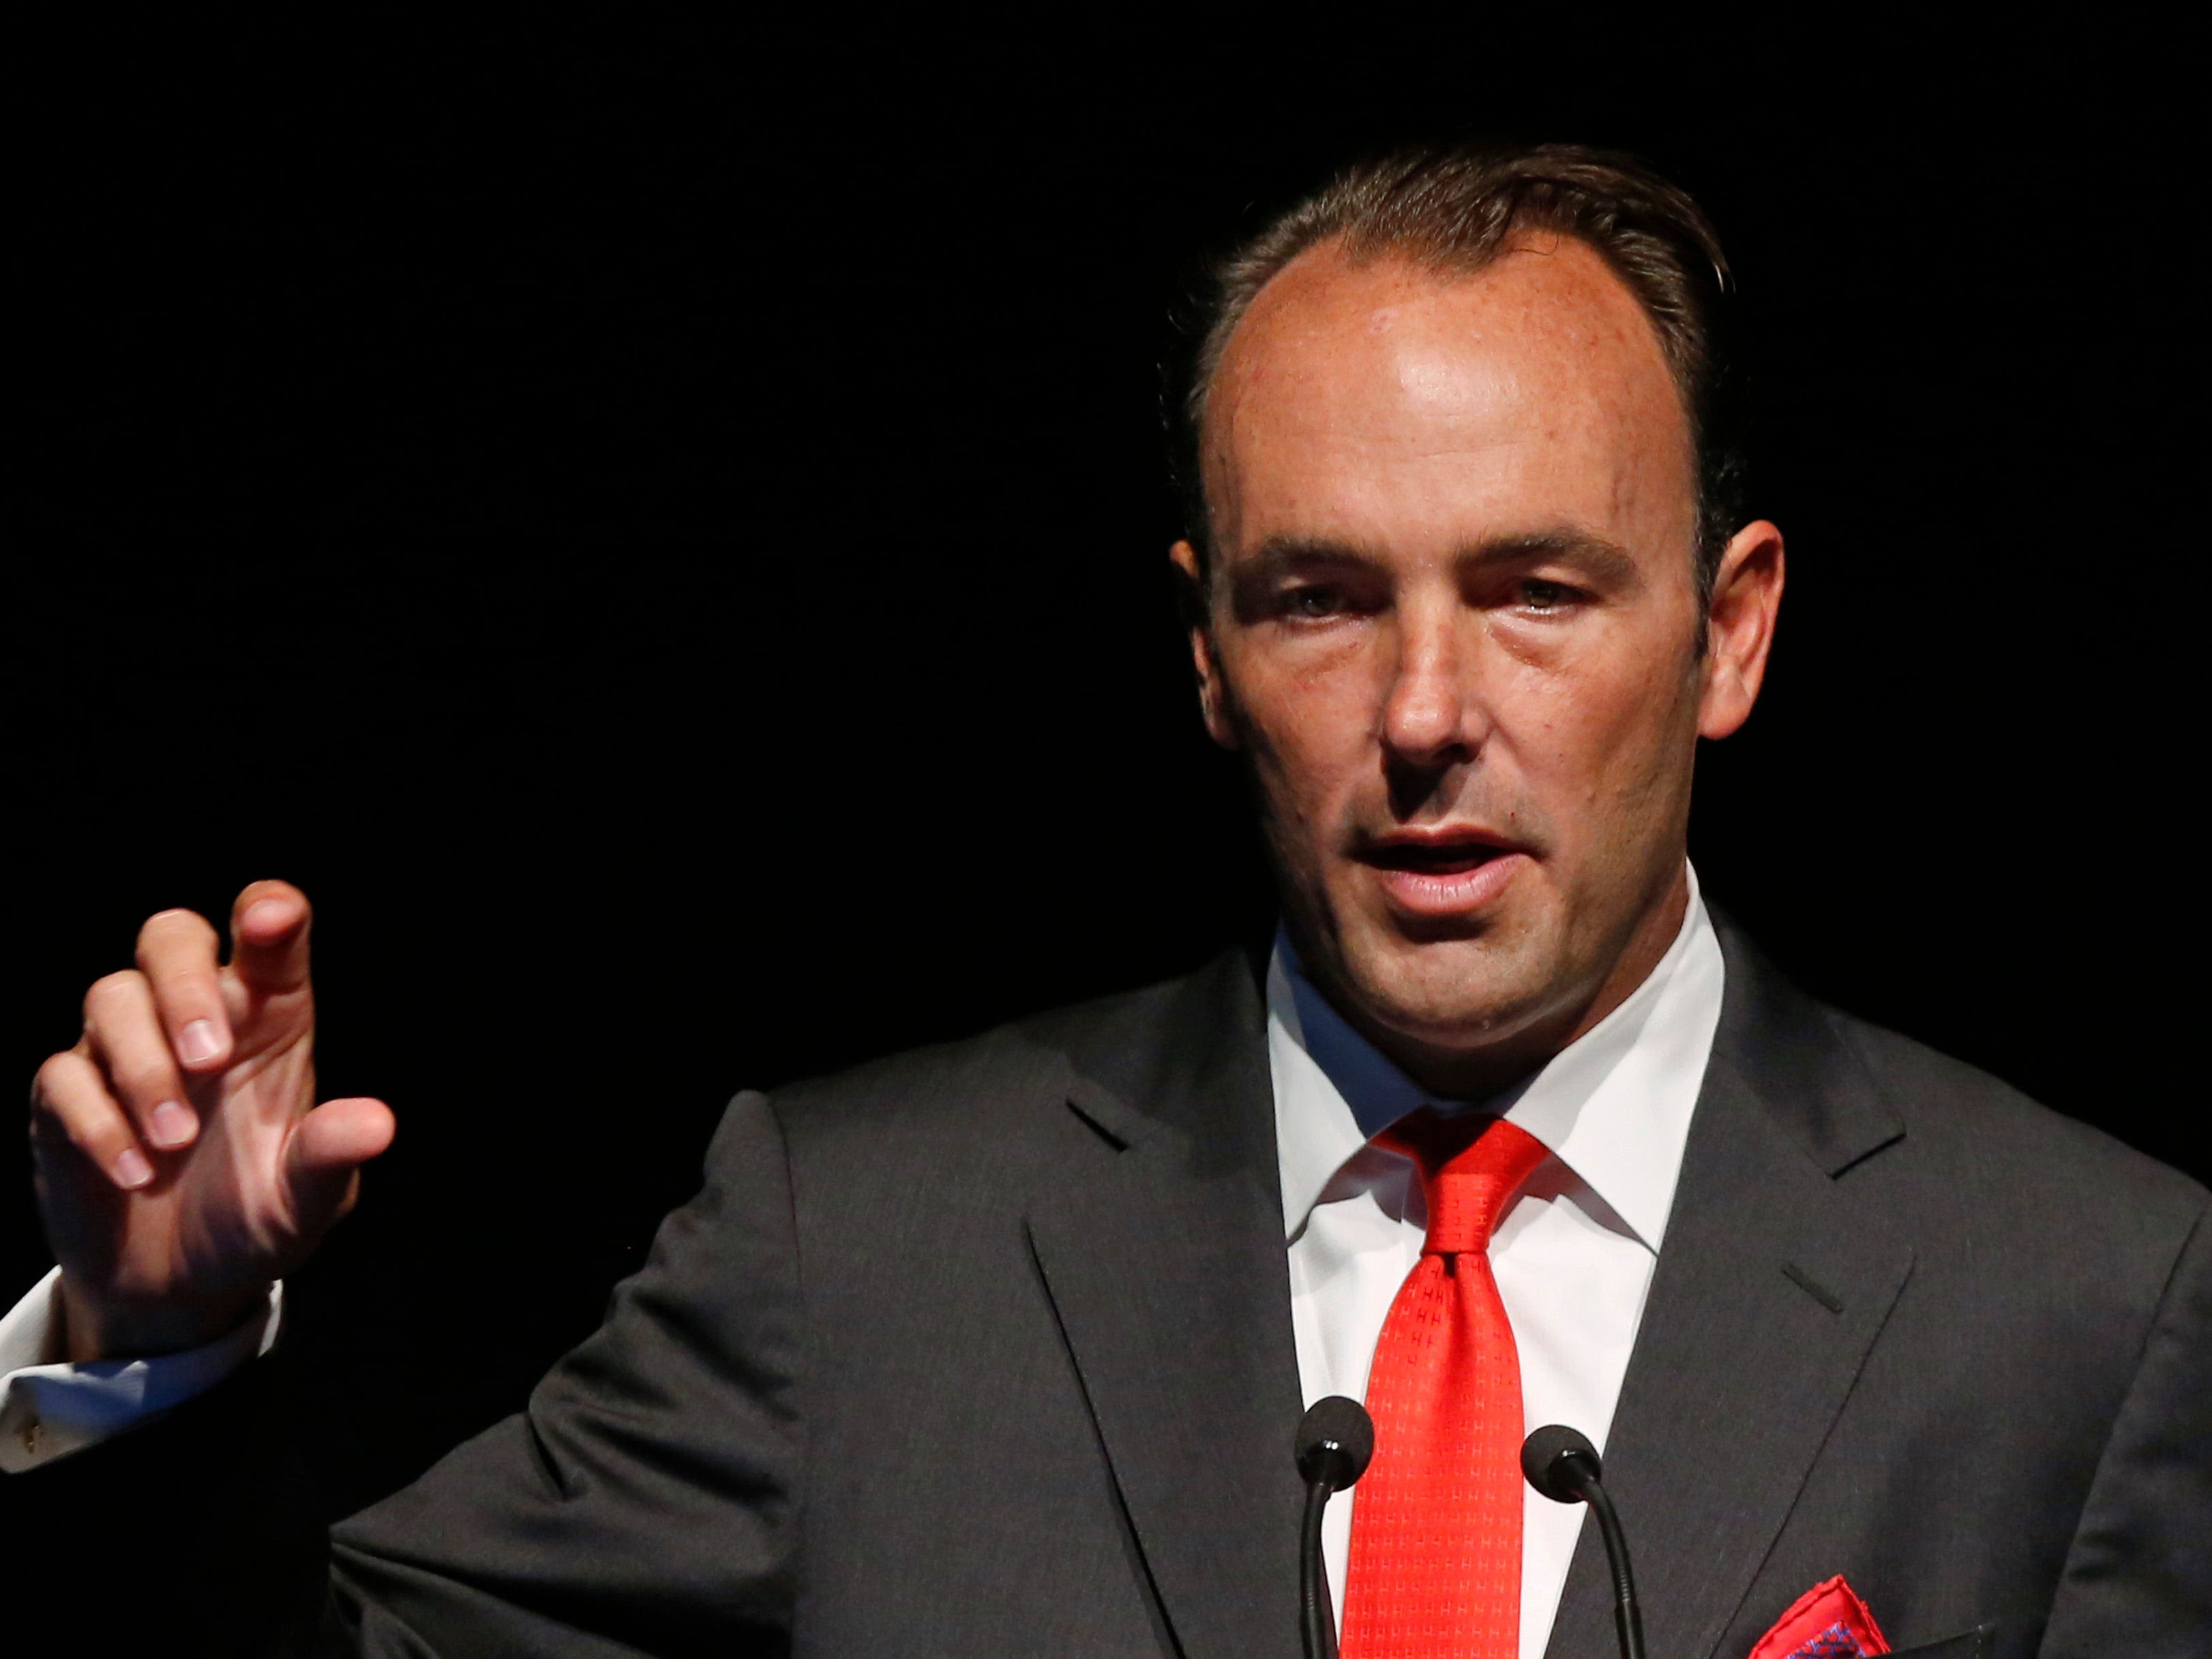 The 3 states where 'Big Short' investor Kyle Bass is buying real estate to capitalize on migration trends